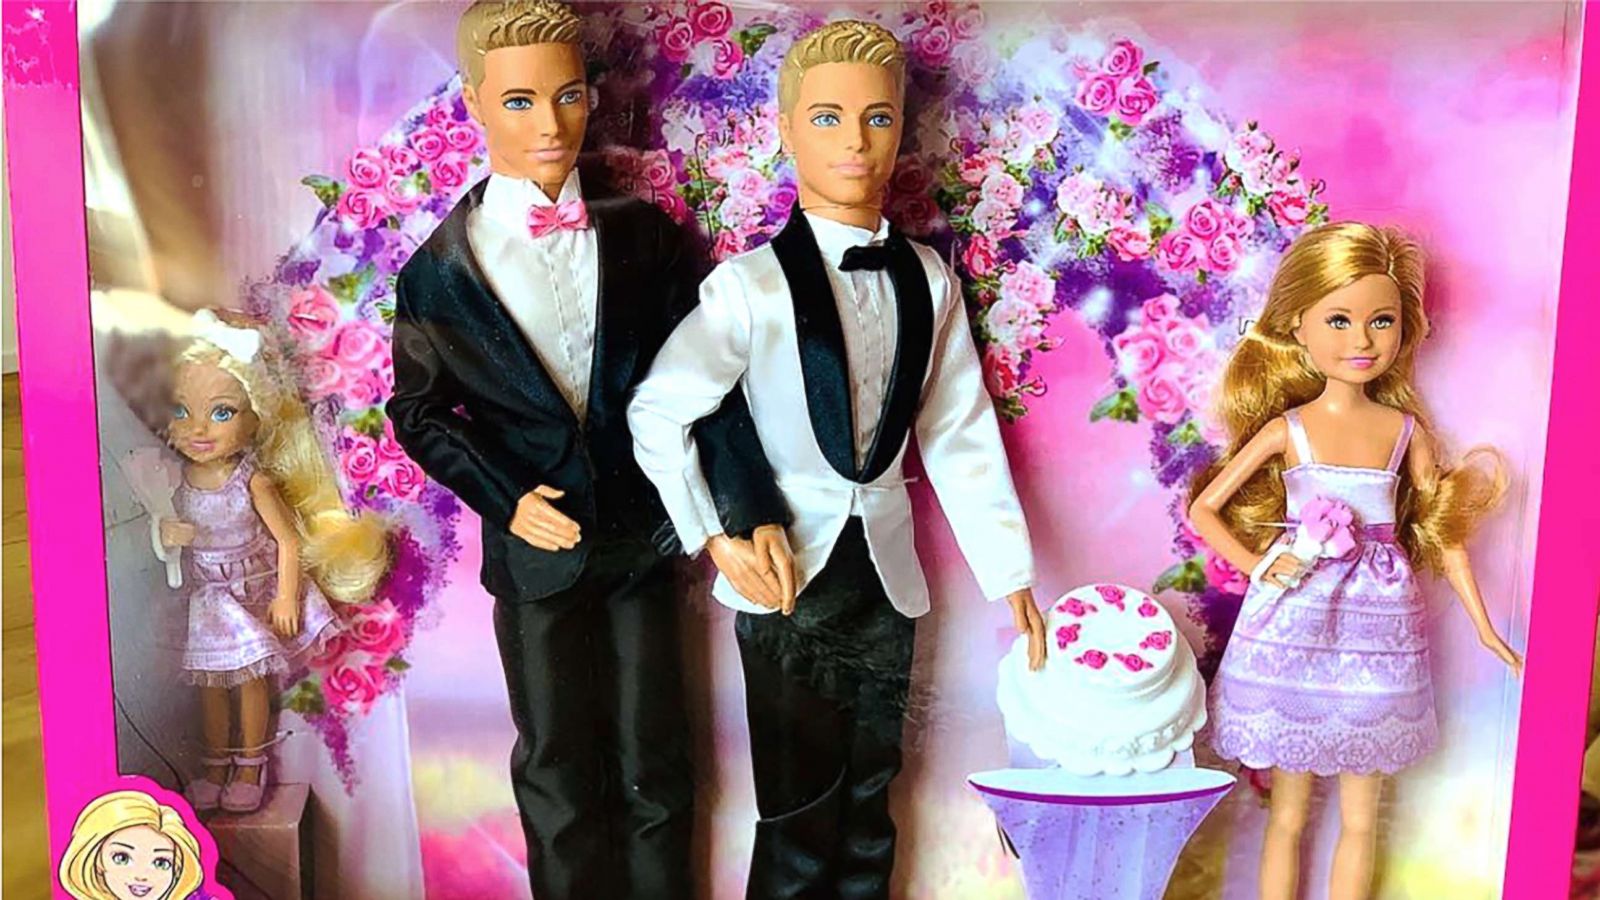 Uncles gift to little girl inspires toy giant to consider a same-sex wedding